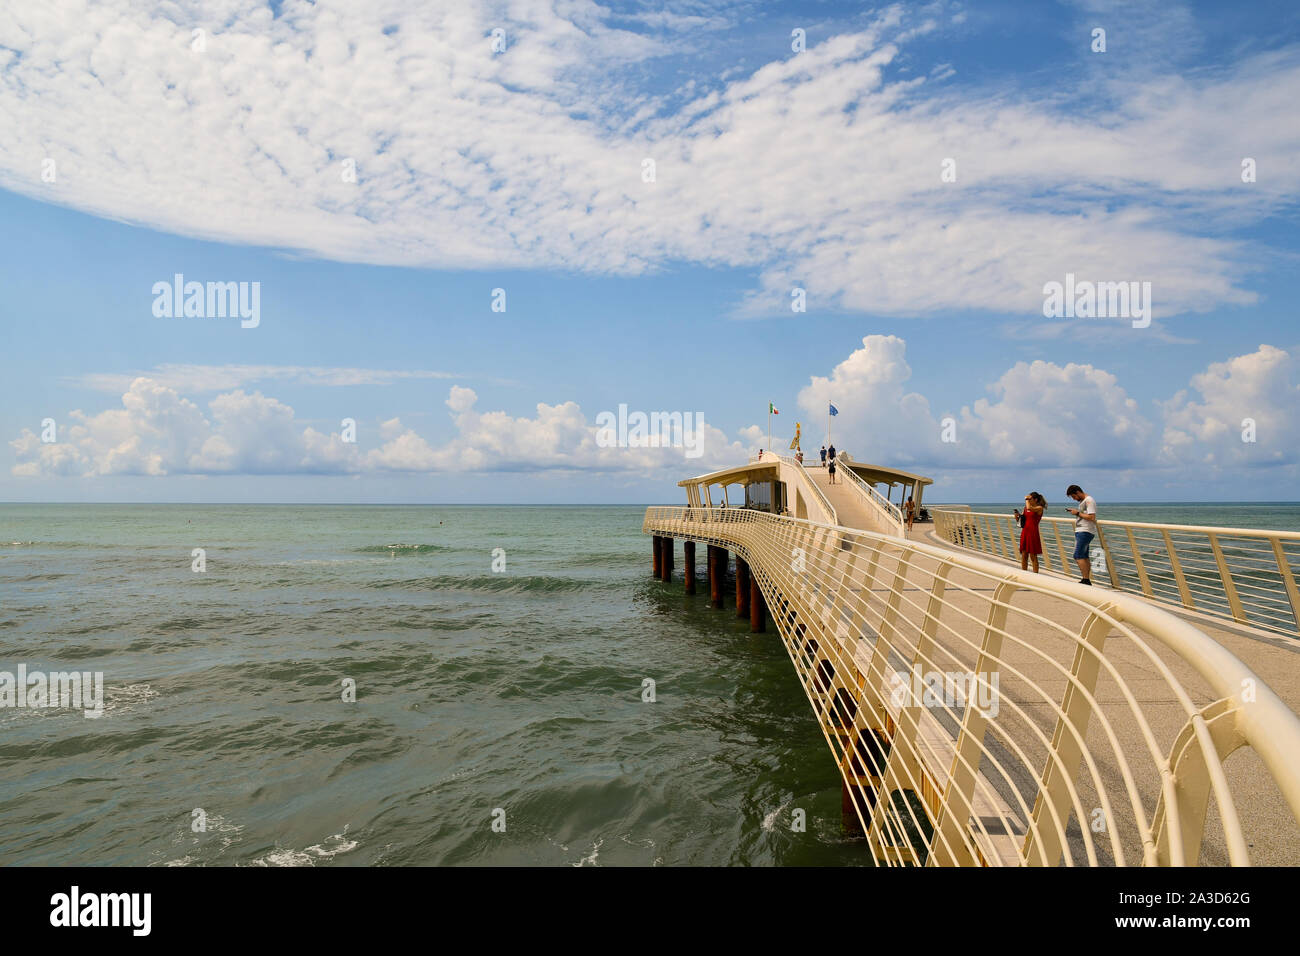 View of Pontile Bellavista Vittoria, a pier built in 2008, with tourists walking in a sunny summer day, Lido di Camaiore, Tuscany, Versilia, Italy Stock Photo